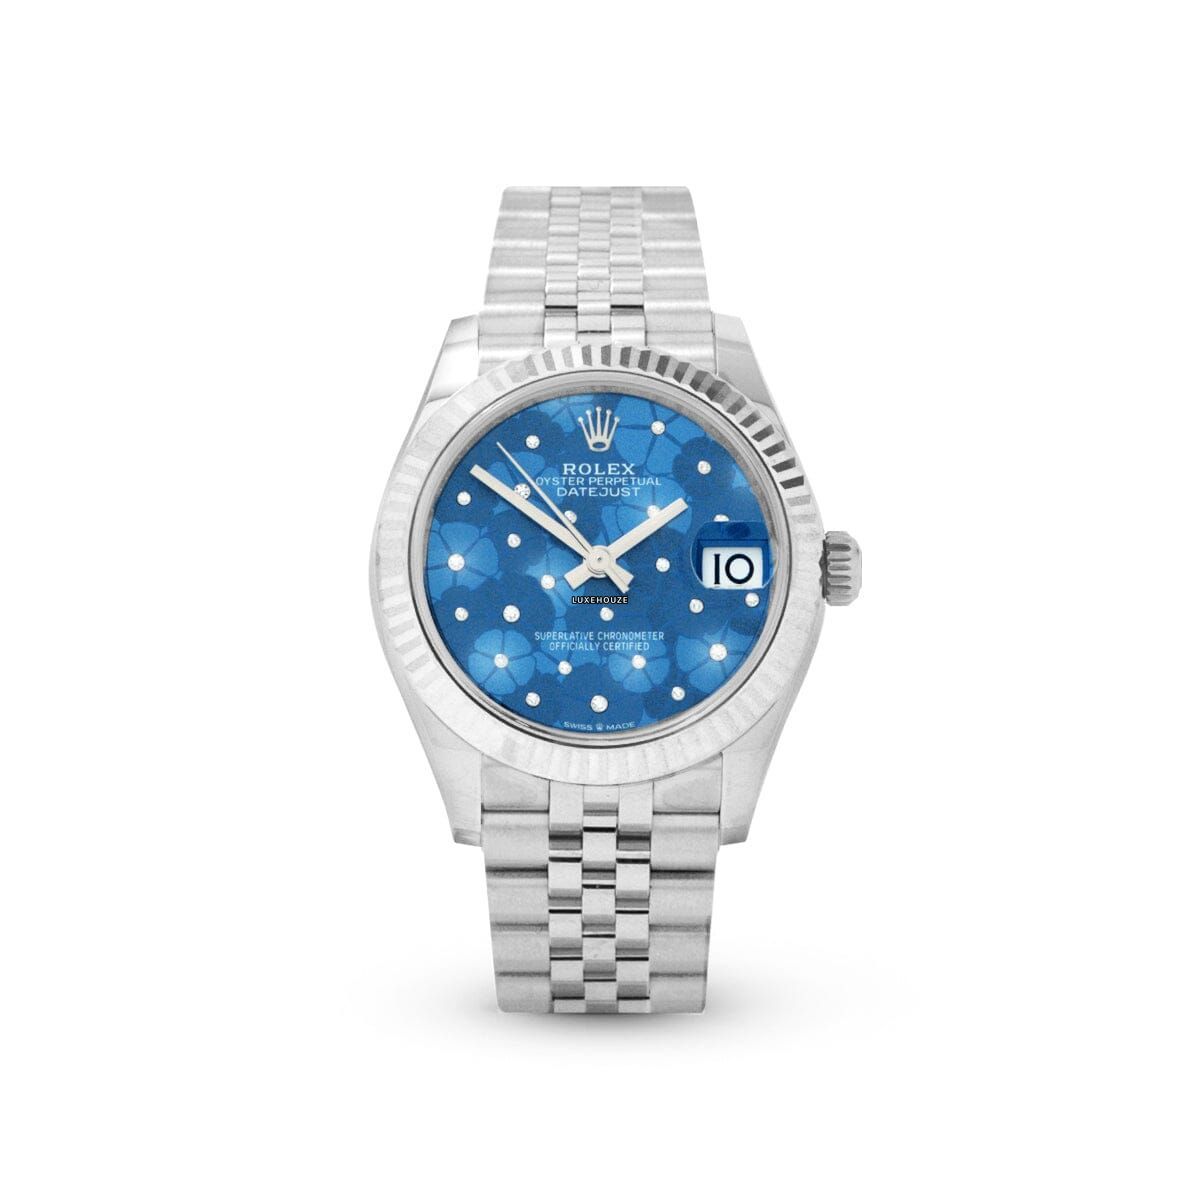 Datejust 31 278274 Blue Floral Jubilee Watches Rolex 